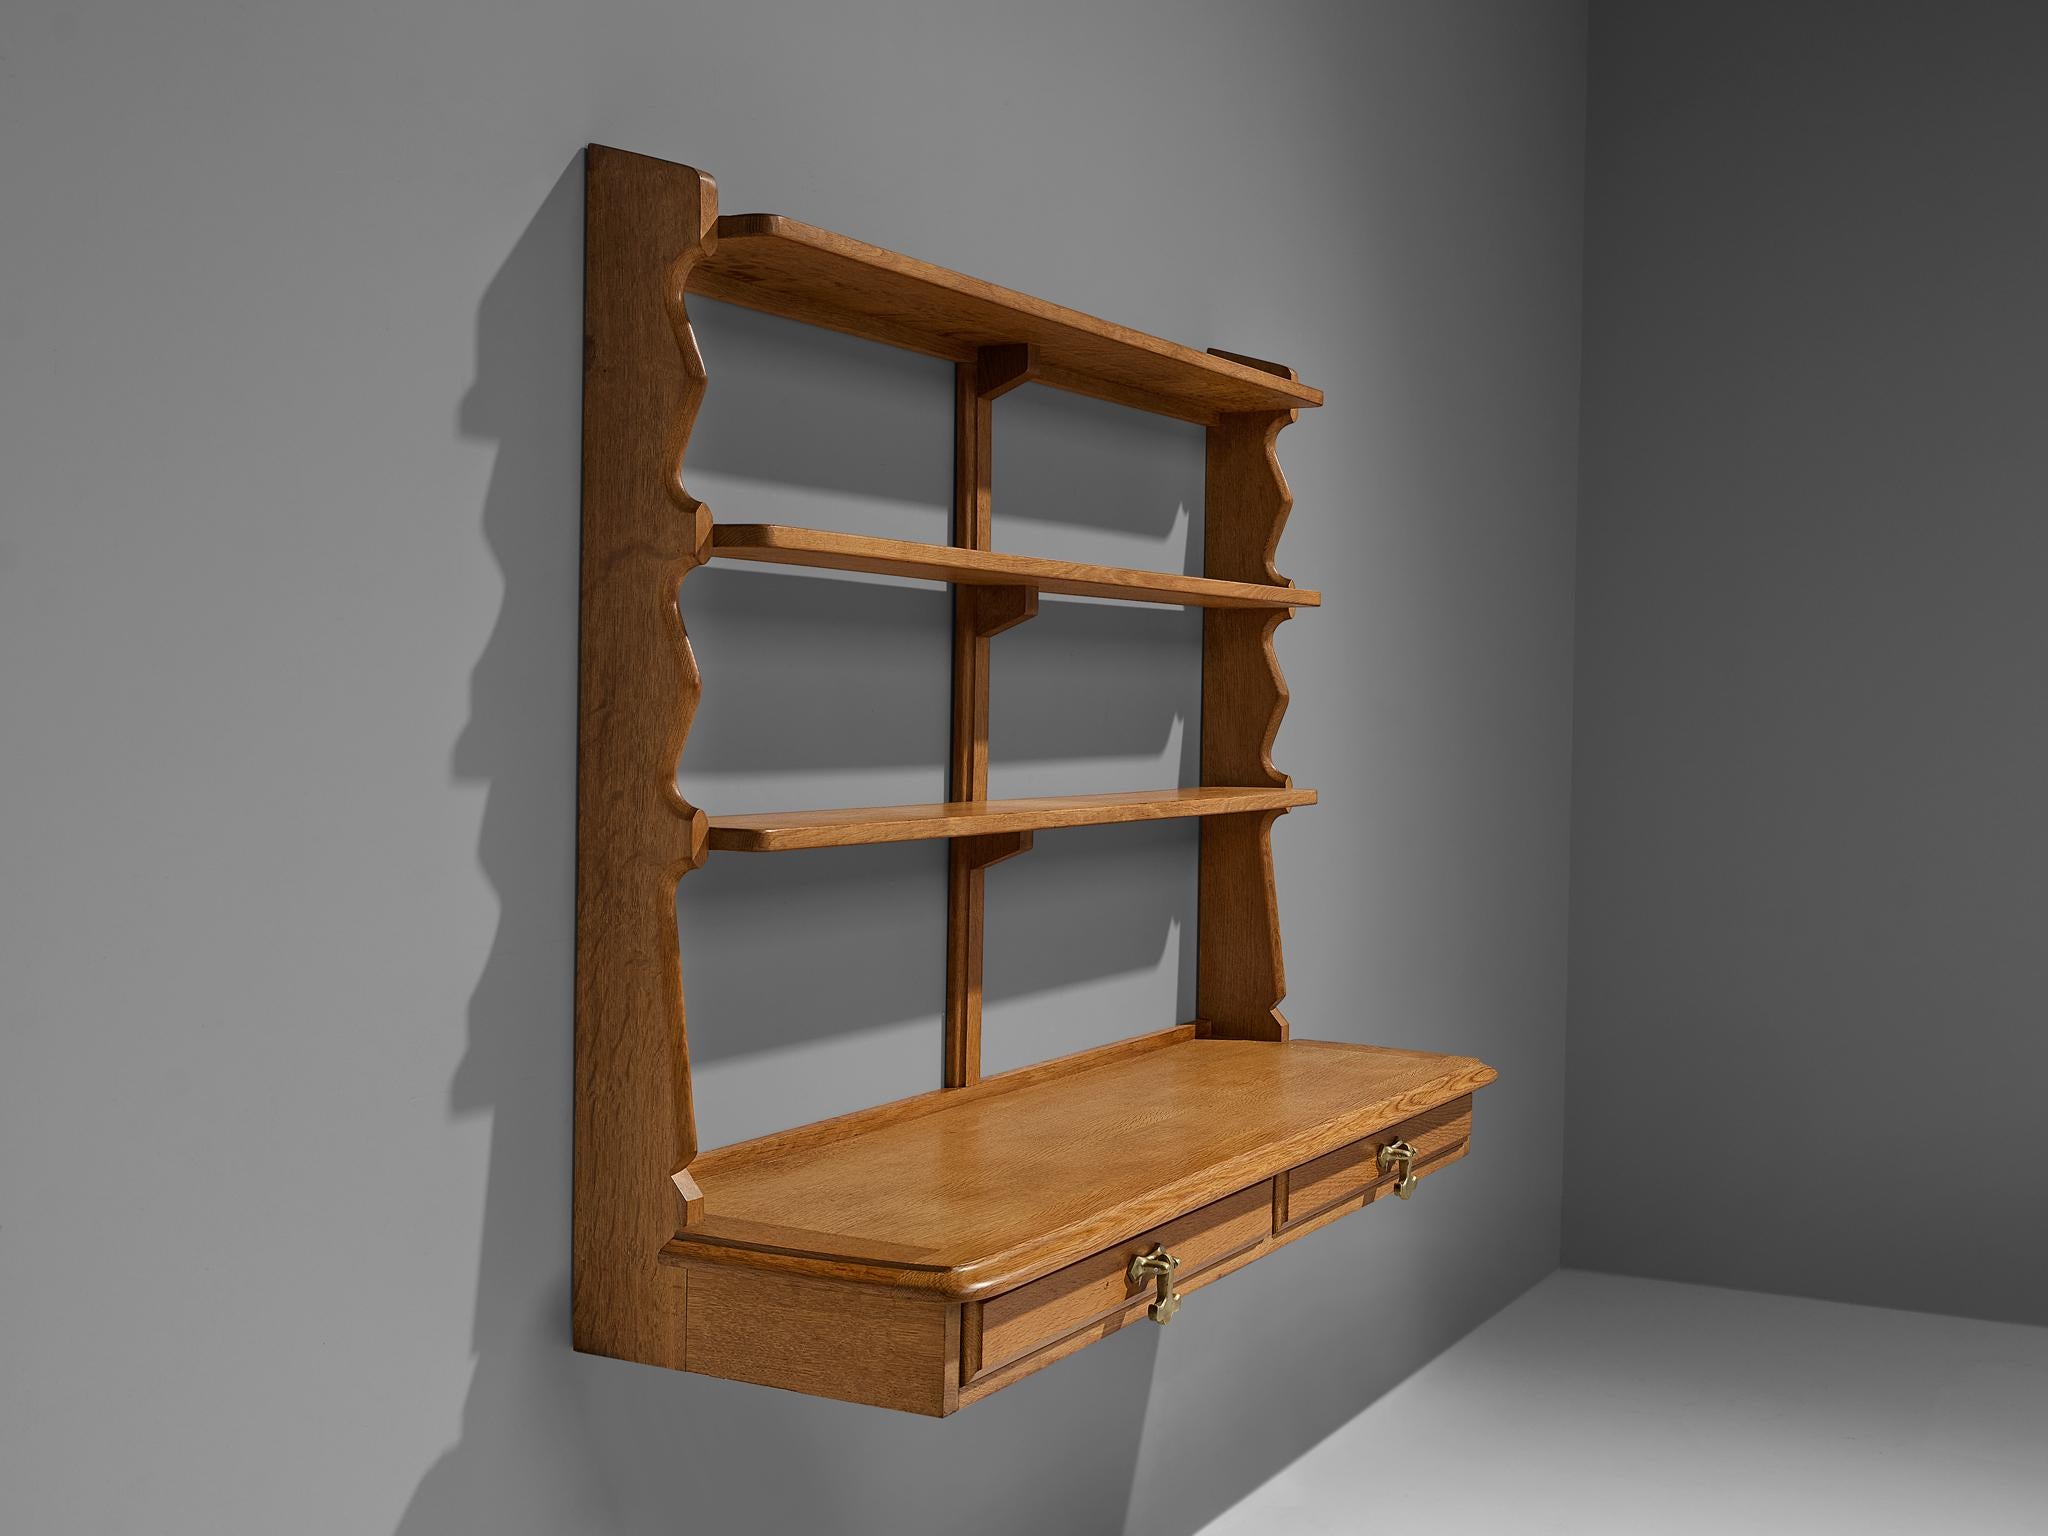 Mid-20th Century Guillerme & Chambron Wall-Mounted Shelf with Drawers in Oak For Sale